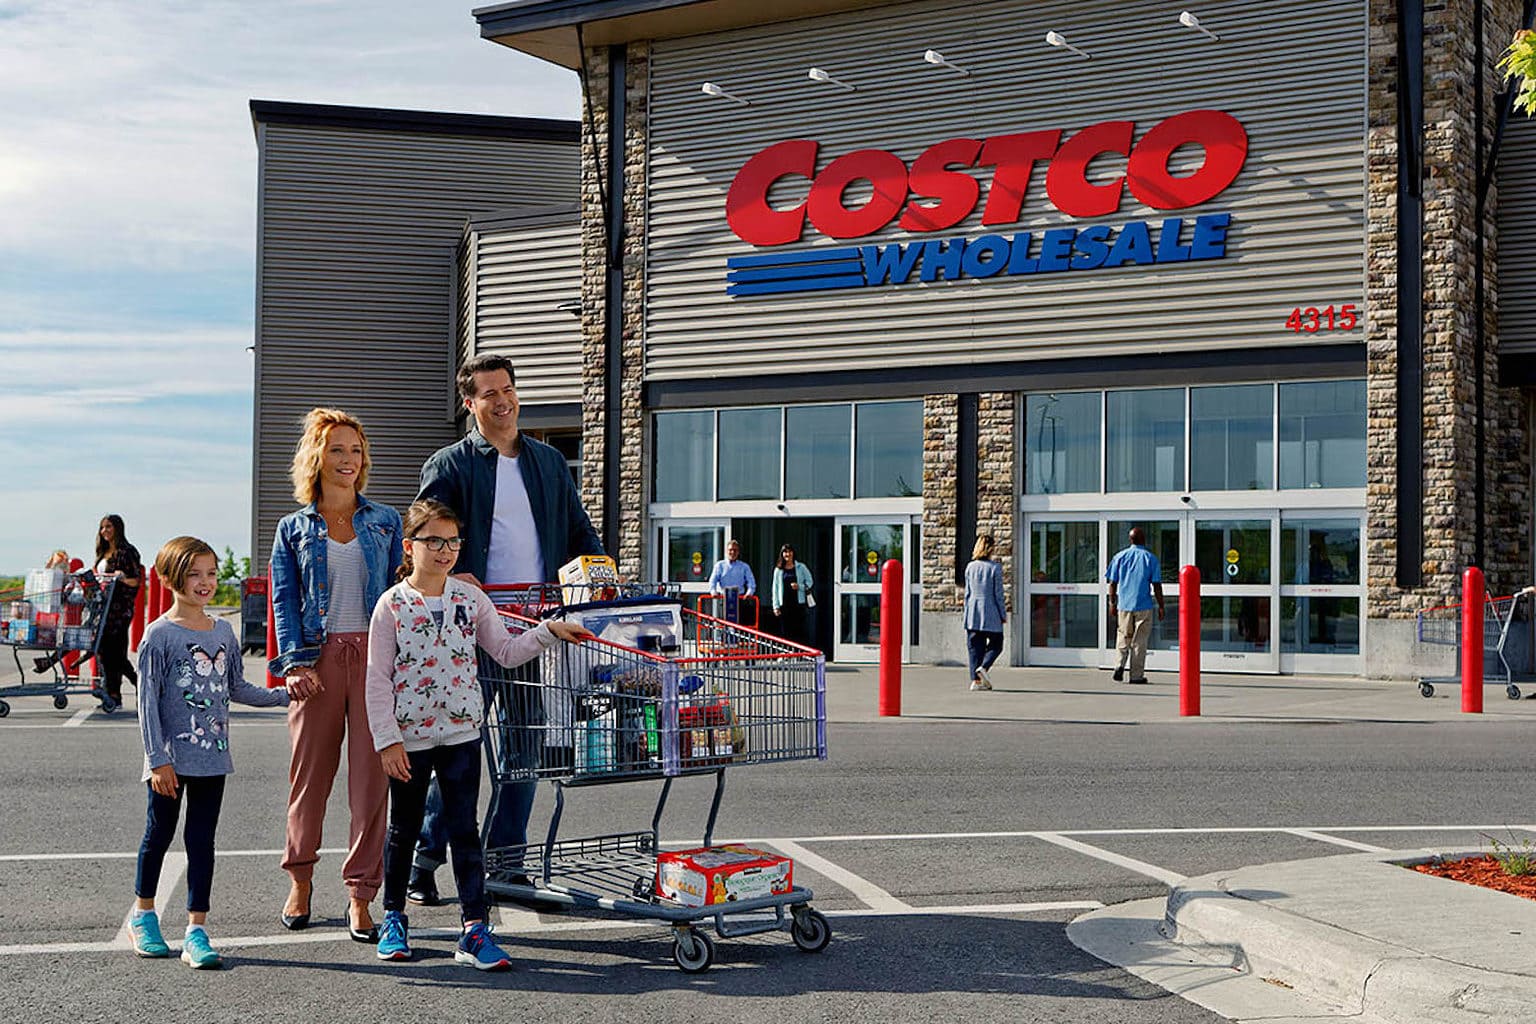 This Costco offer will give you ultimate savings this holiday season.